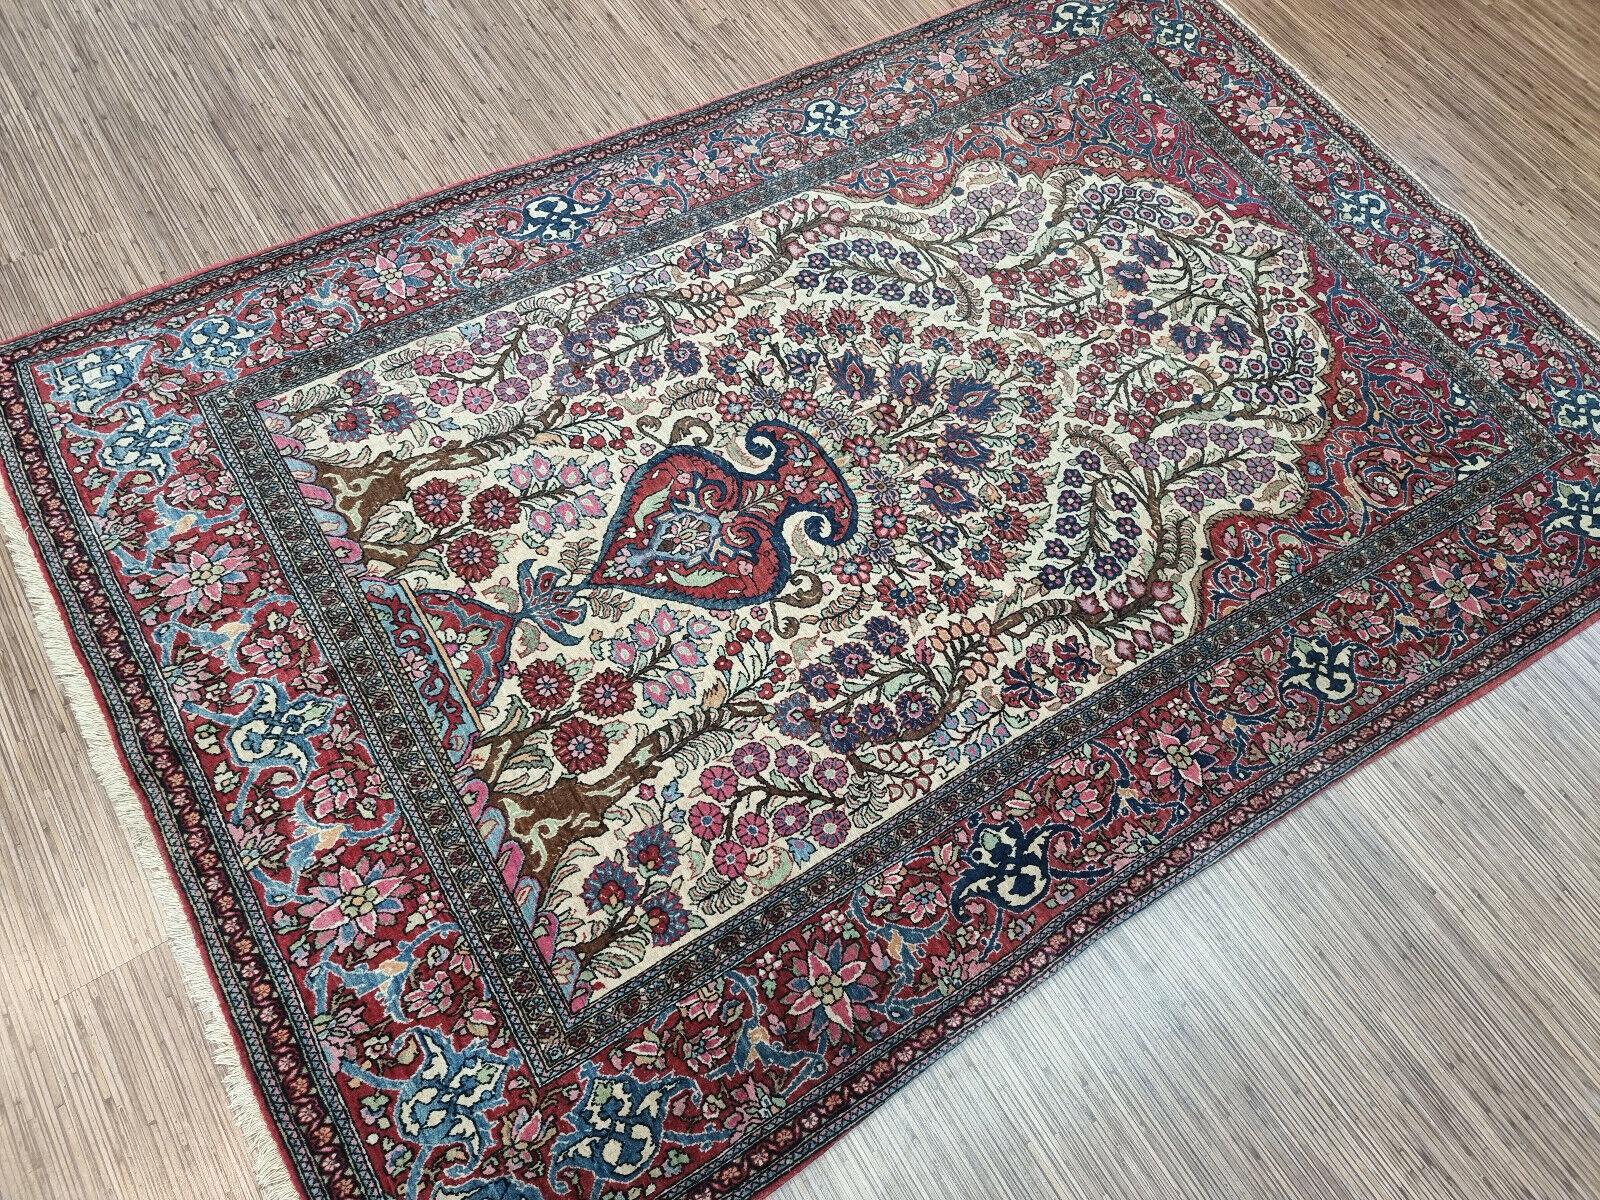 Handmade Antique Persian Style Isfahan Prayer Rug 4.6' x 6.8', 1900s - 1D85 In Good Condition For Sale In Bordeaux, FR